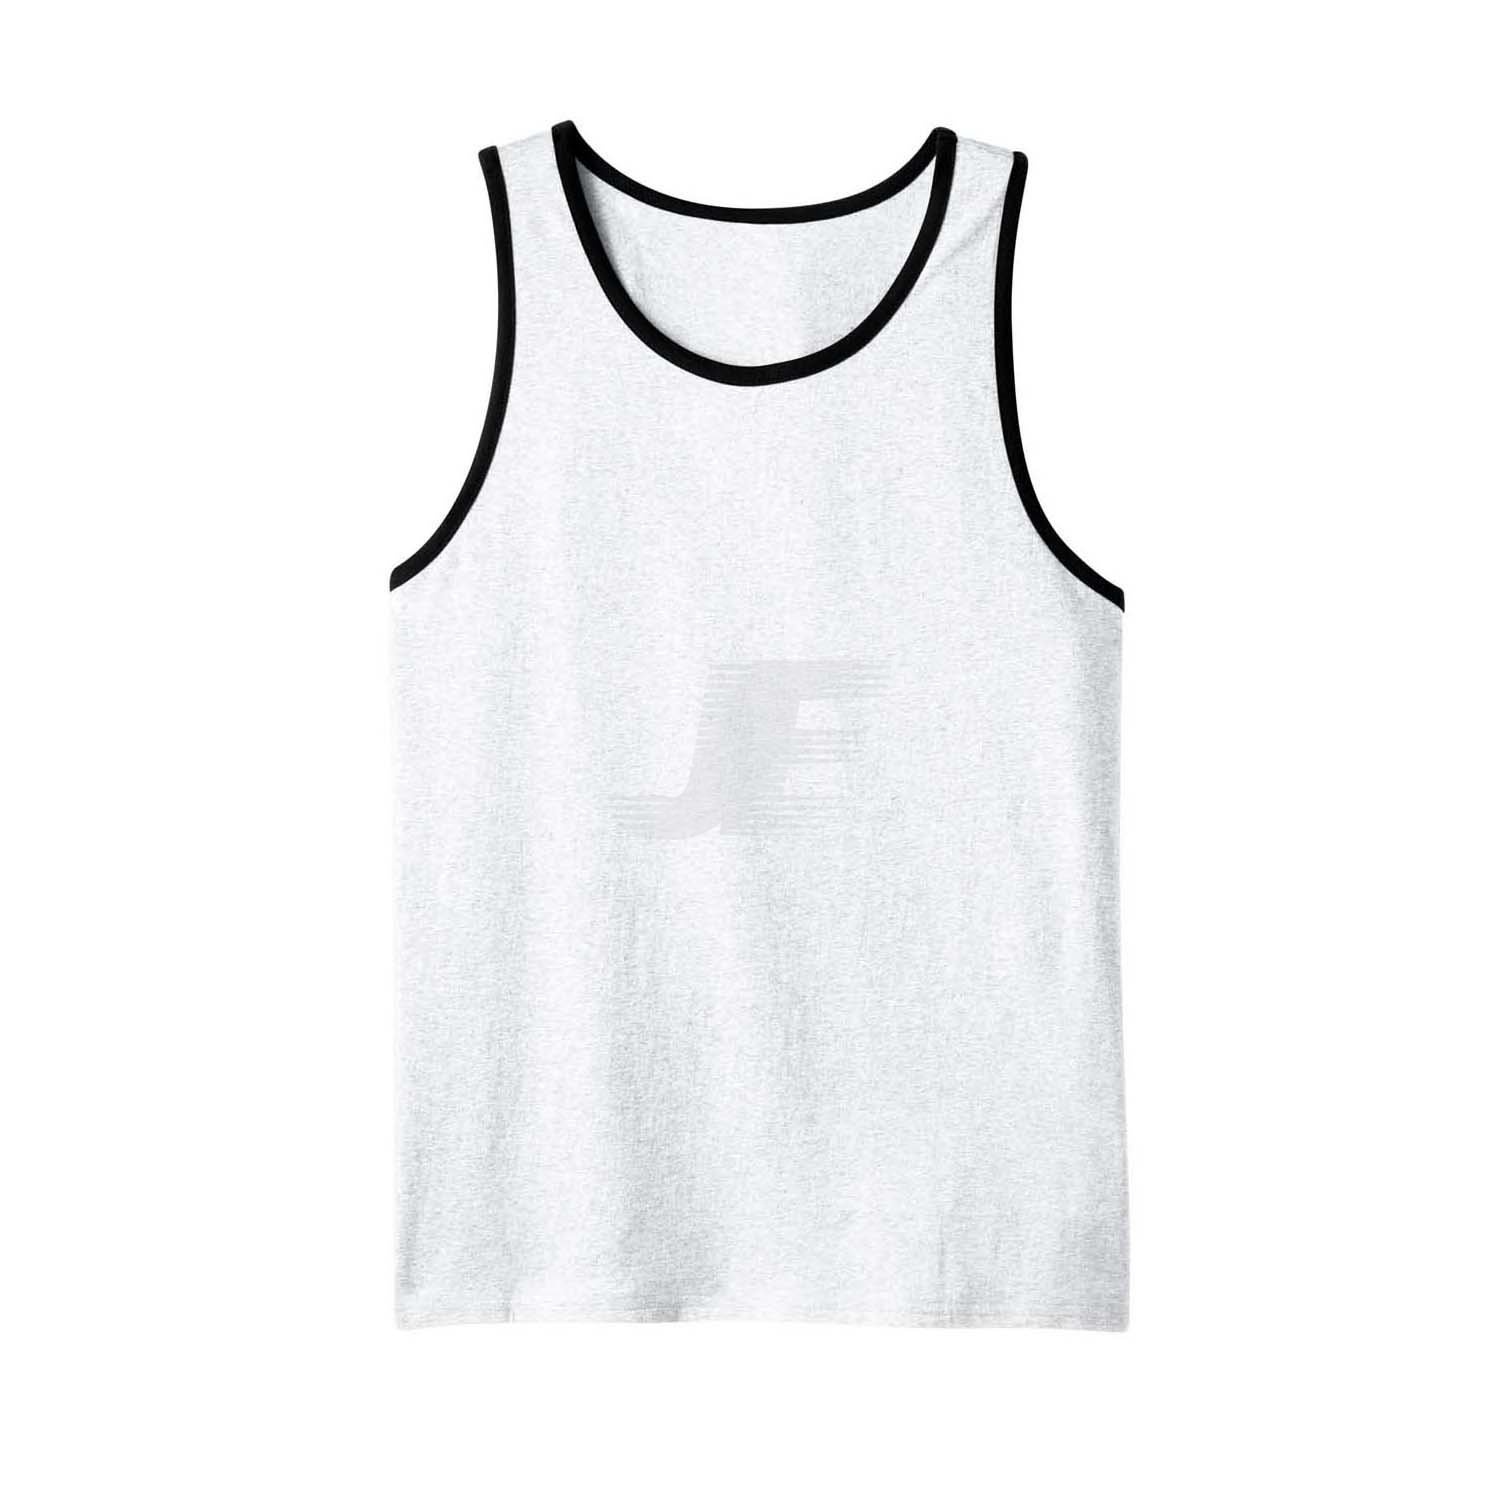 Men's Heather Grey Tank Top With Black Piping